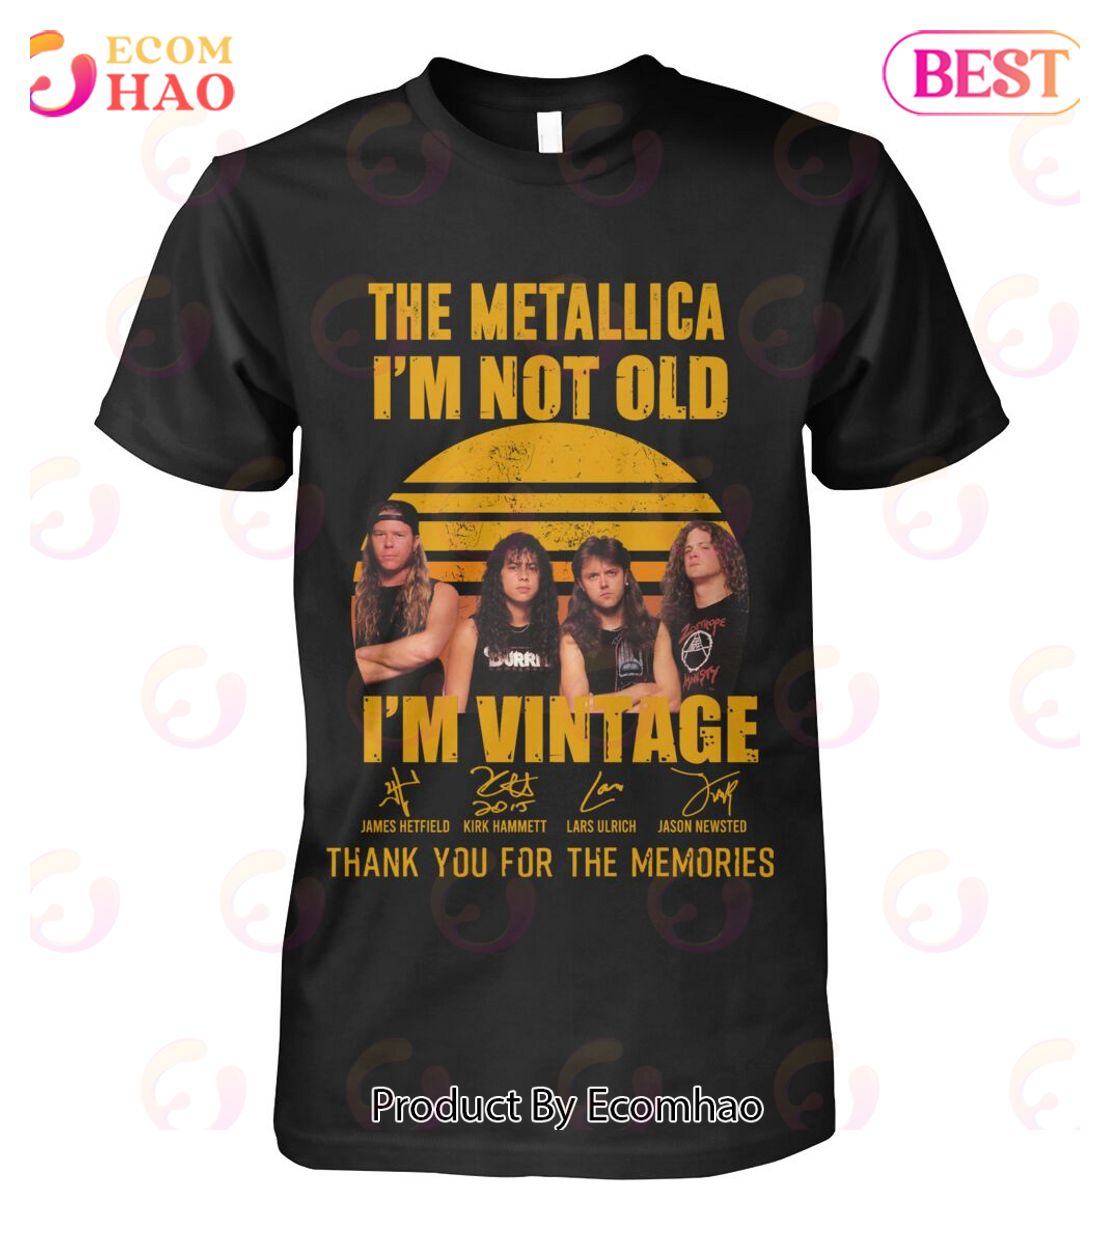 Vervreemden cocaïne Hong Kong The Metallica I'm Not Old I'm Vintage Thank You For The Memories T-Shirt -  Ecomhao Store